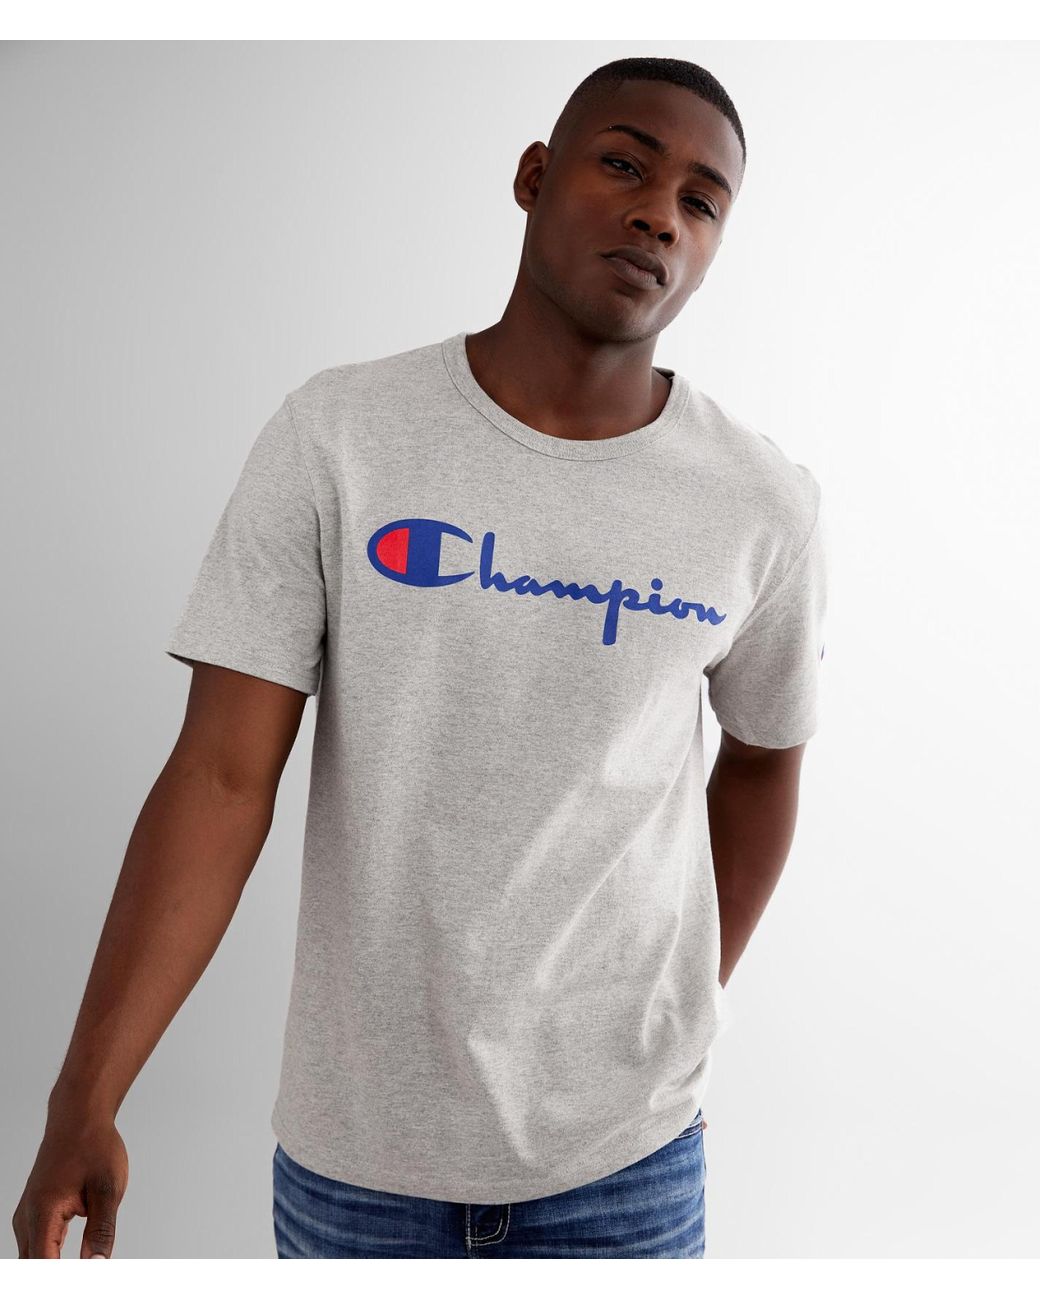 Champion ® Heritage T-shirt in Grey (Gray) for Men - Lyst